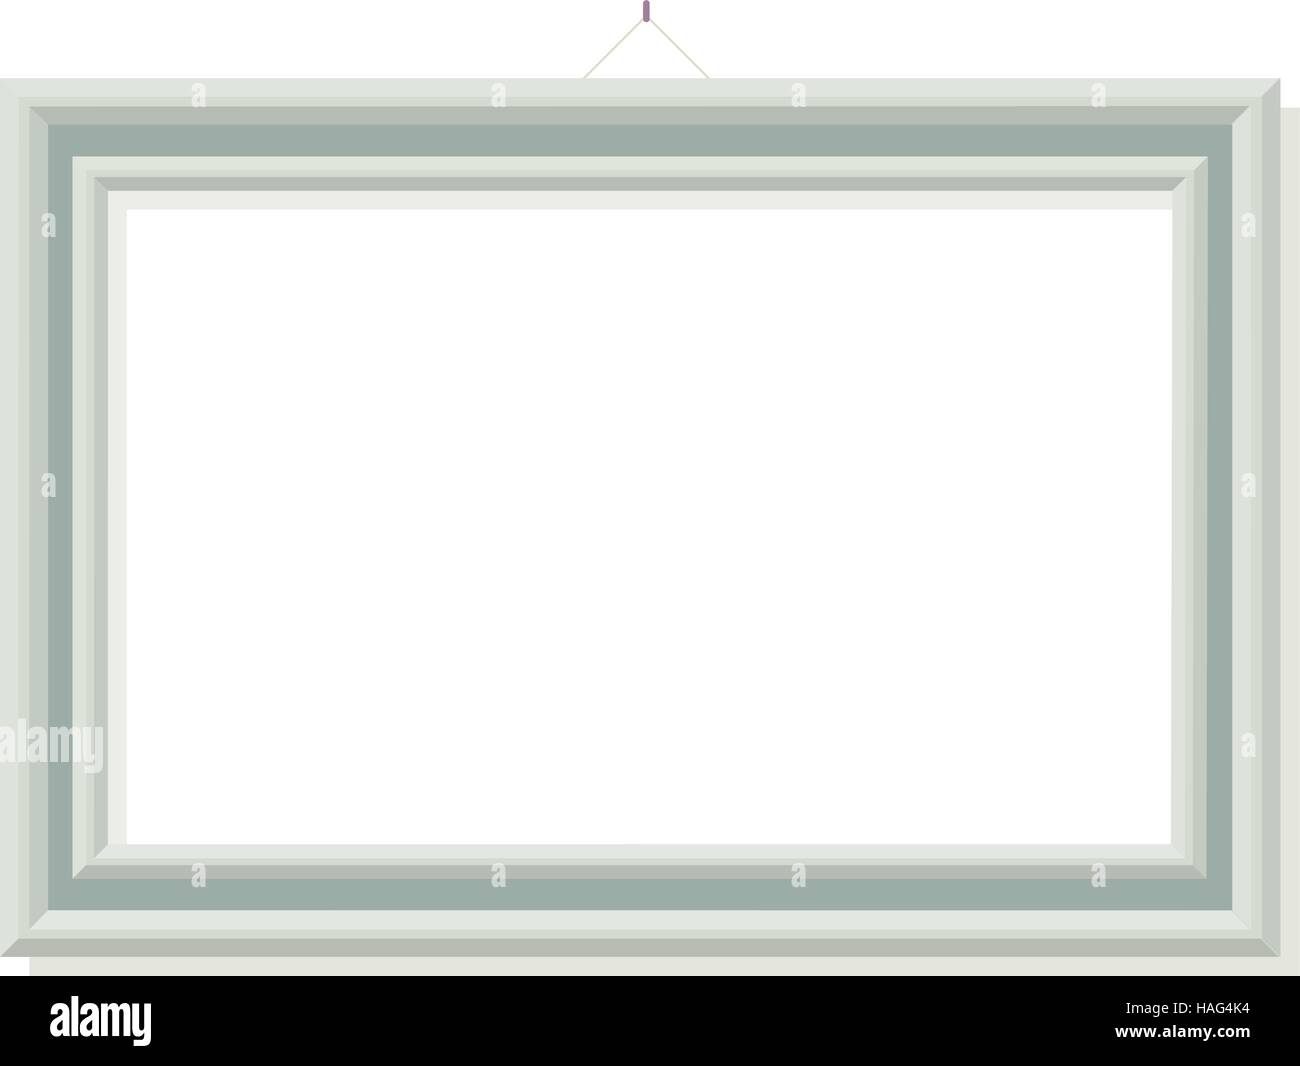 Isolated green photo frame on the white wall Stock Vector